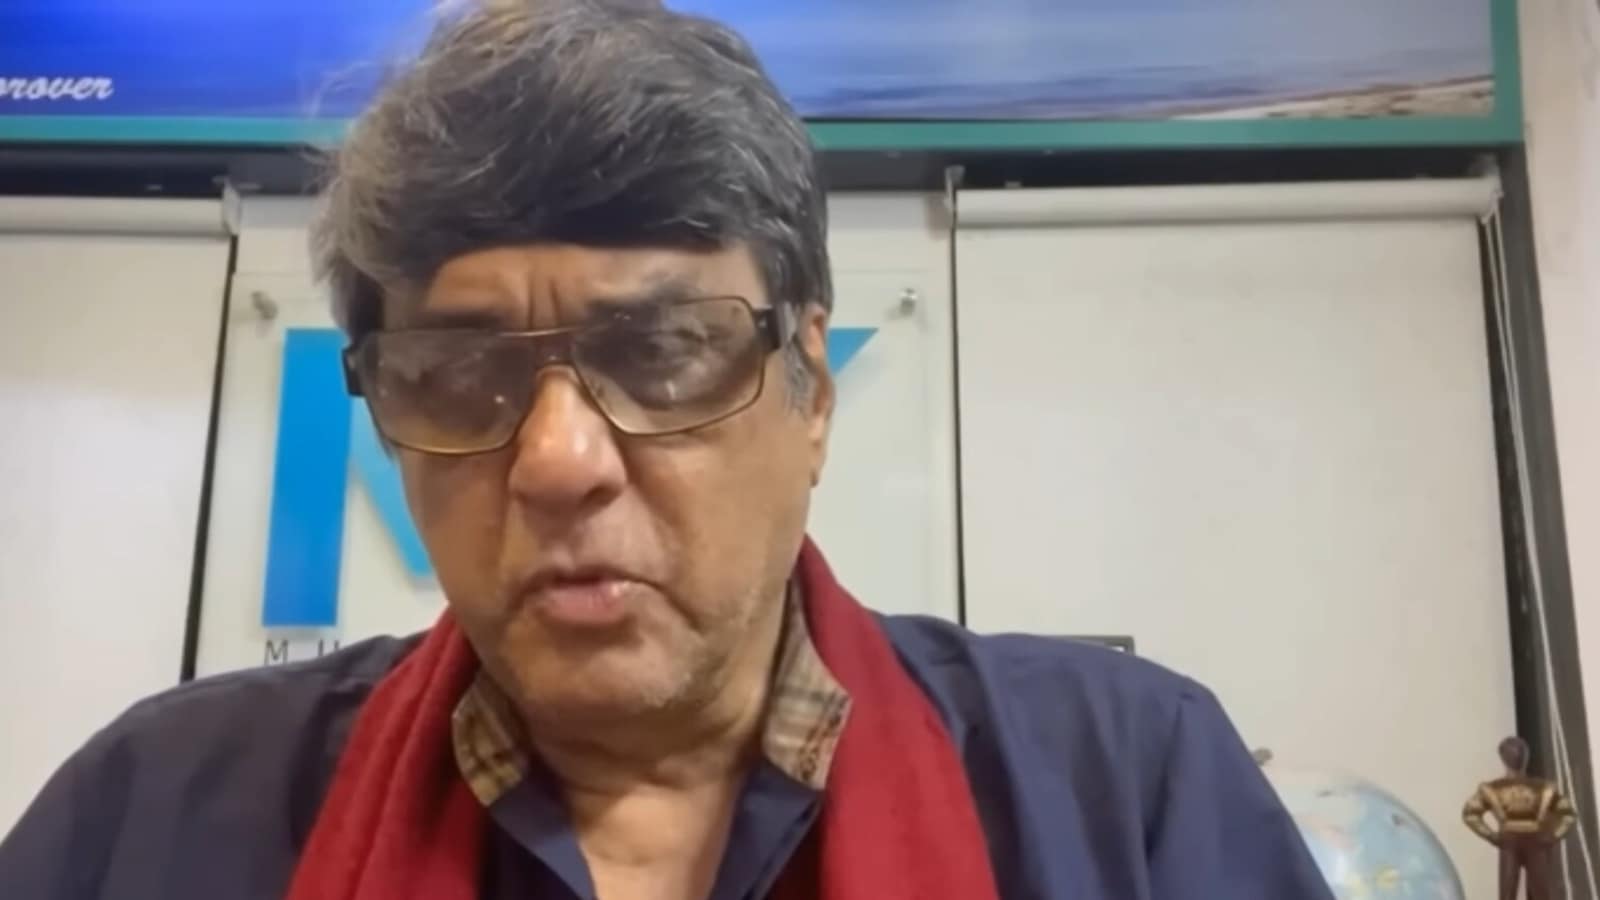 Schul Gals Seks 1boys And 2gals - Mukesh Khanna says 'if a girl tells a boy she wants sex, she is running  dhanda' - Hindustan Times